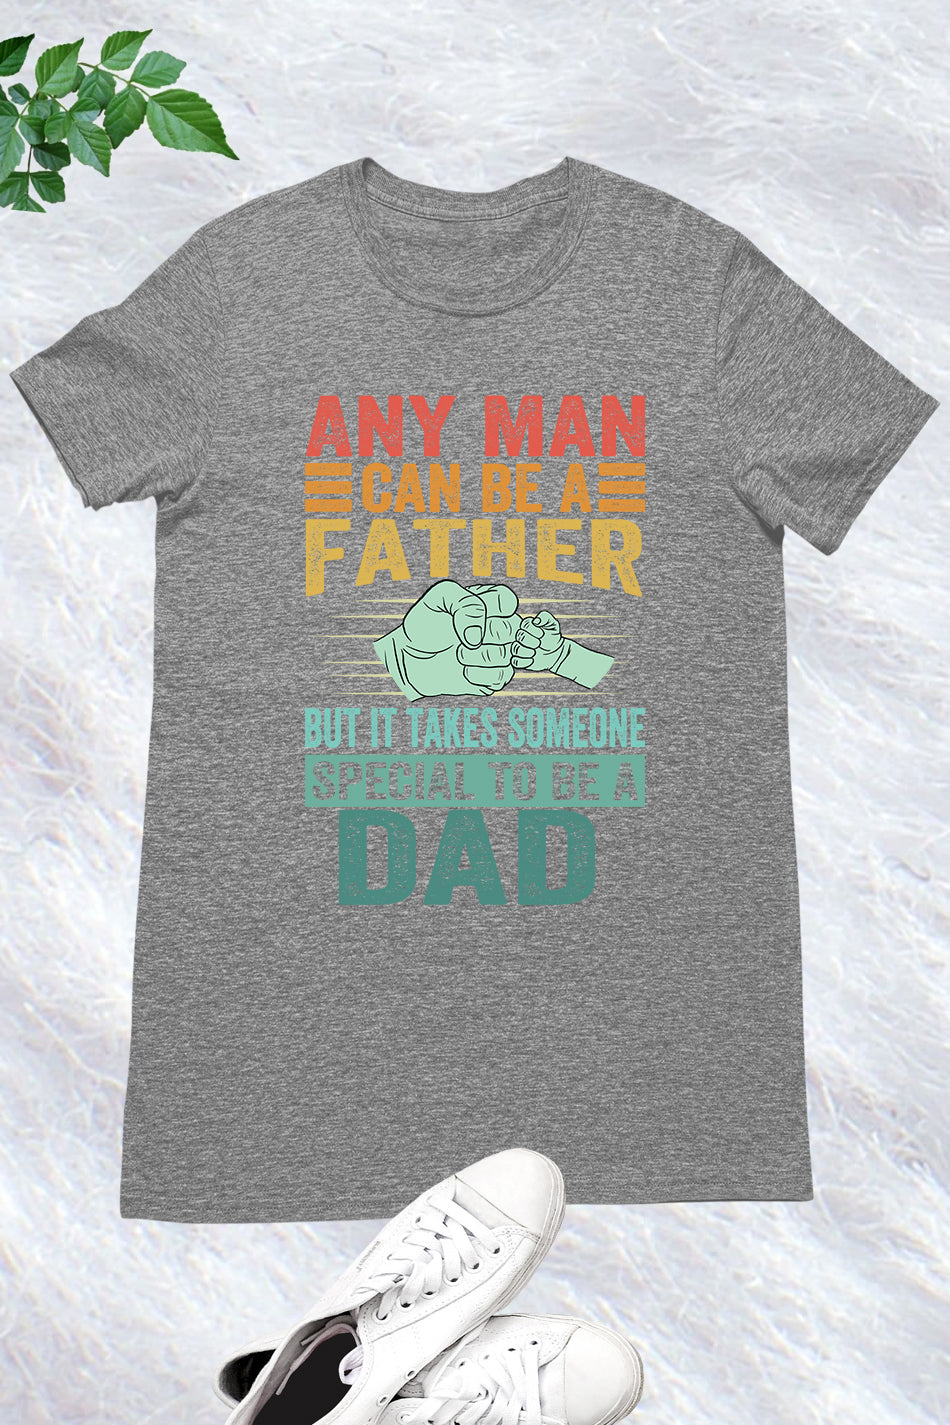 But It Takes Someone Special To Be A Dad Shirt